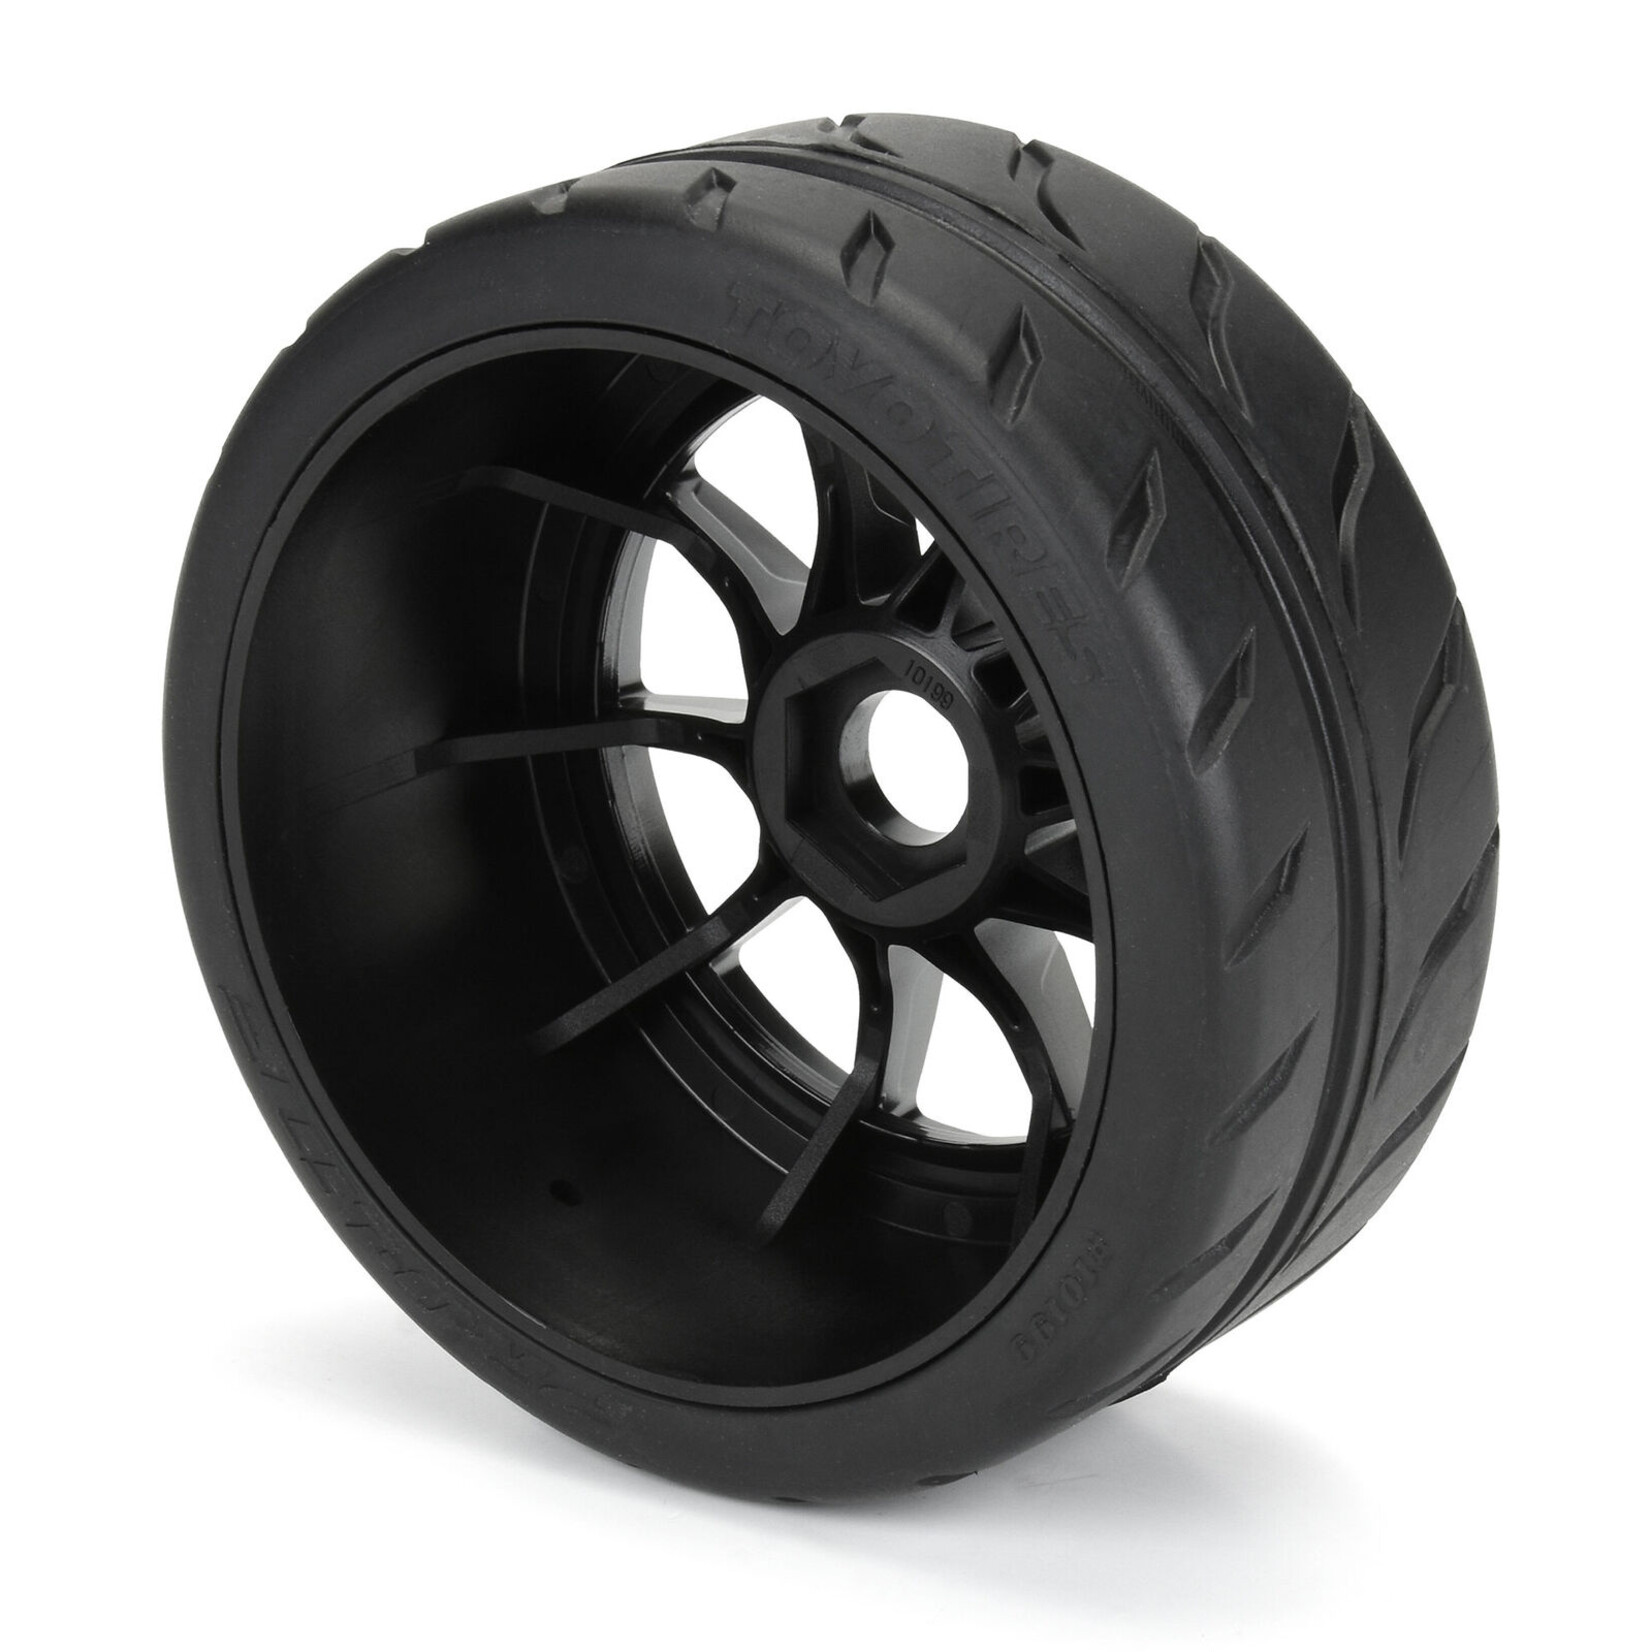 Pro-Line Pro-Line 1/7 Toyo Proxes 2.9" Belted Tires Pre-Mounted w/17mm Spectre Wheels (Gunmetal) #10199-11